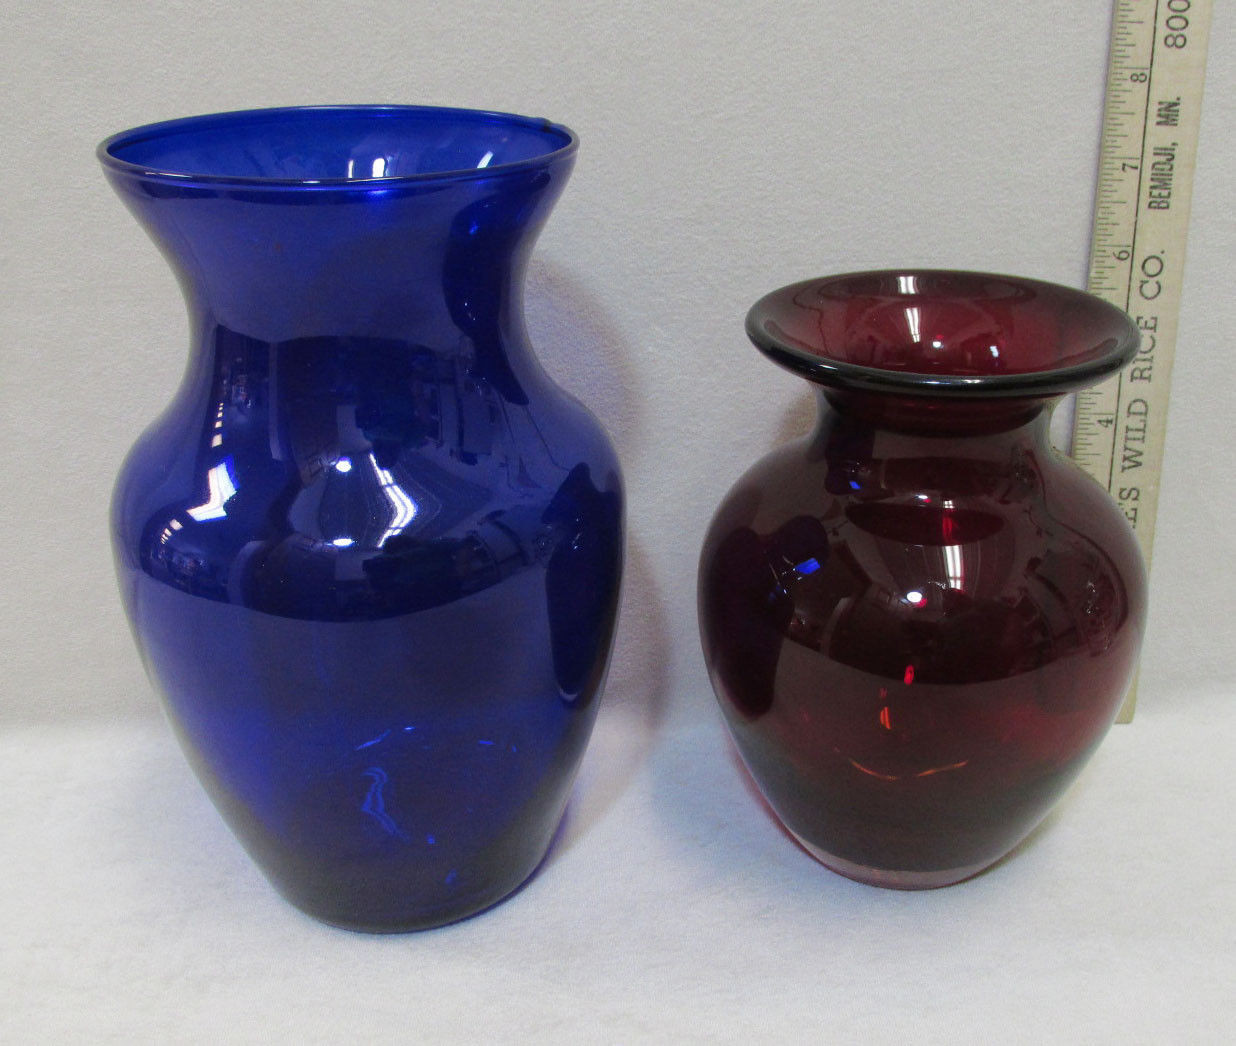 13 Ideal Clear Blue Glass Vases 2024 free download clear blue glass vases of clear blue vase photos lot 3 red clear blue glass vases patriotic regarding clear blue vase photos lot 3 red clear blue glass vases patriotic and 49 similar items